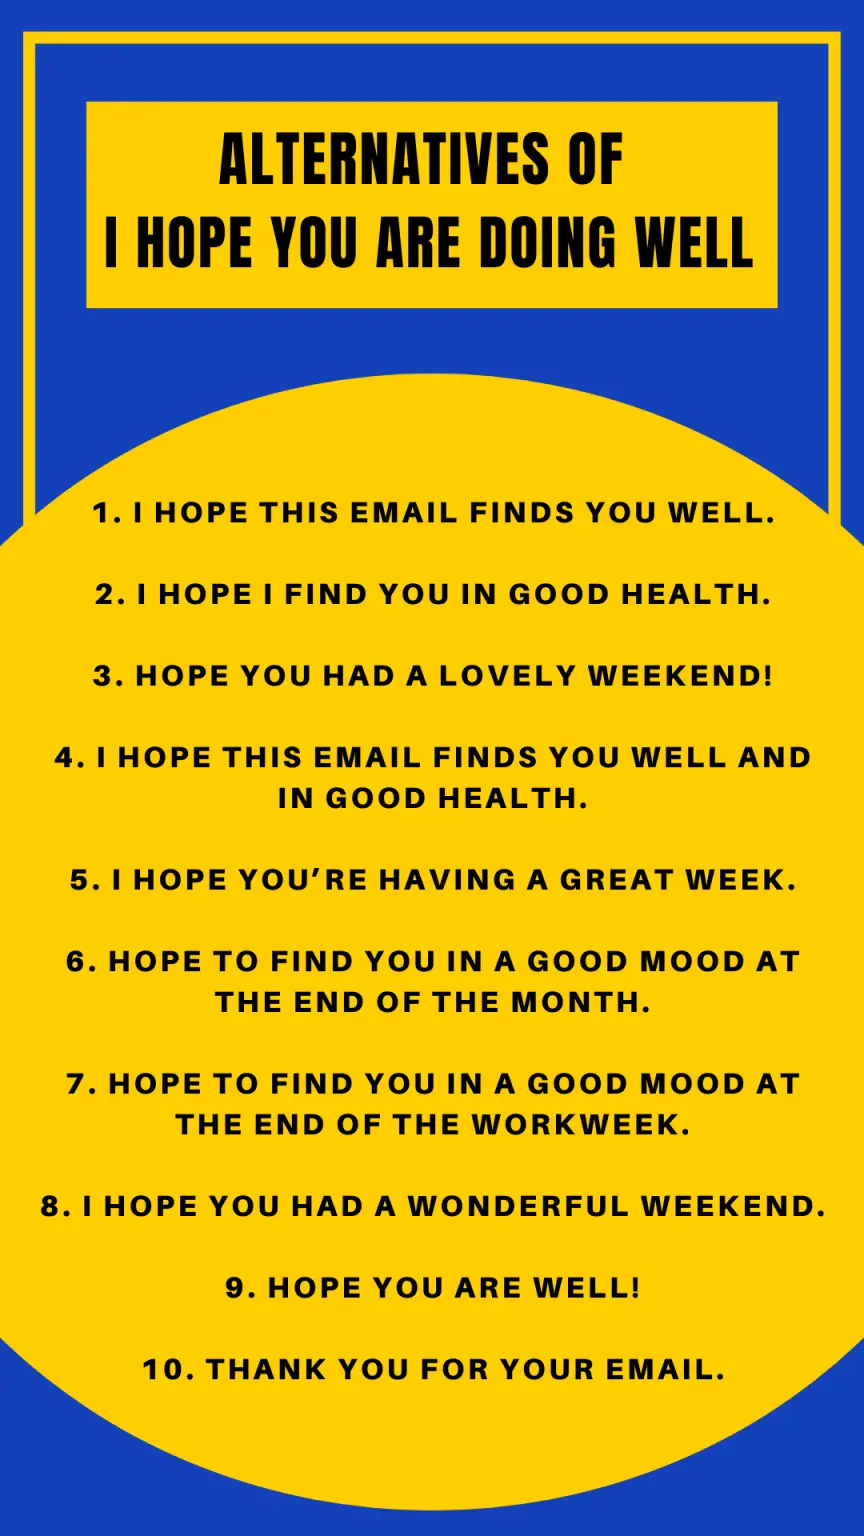 20 Better Ways Than “I Hope You Are Doing Well'' to Start Your Email